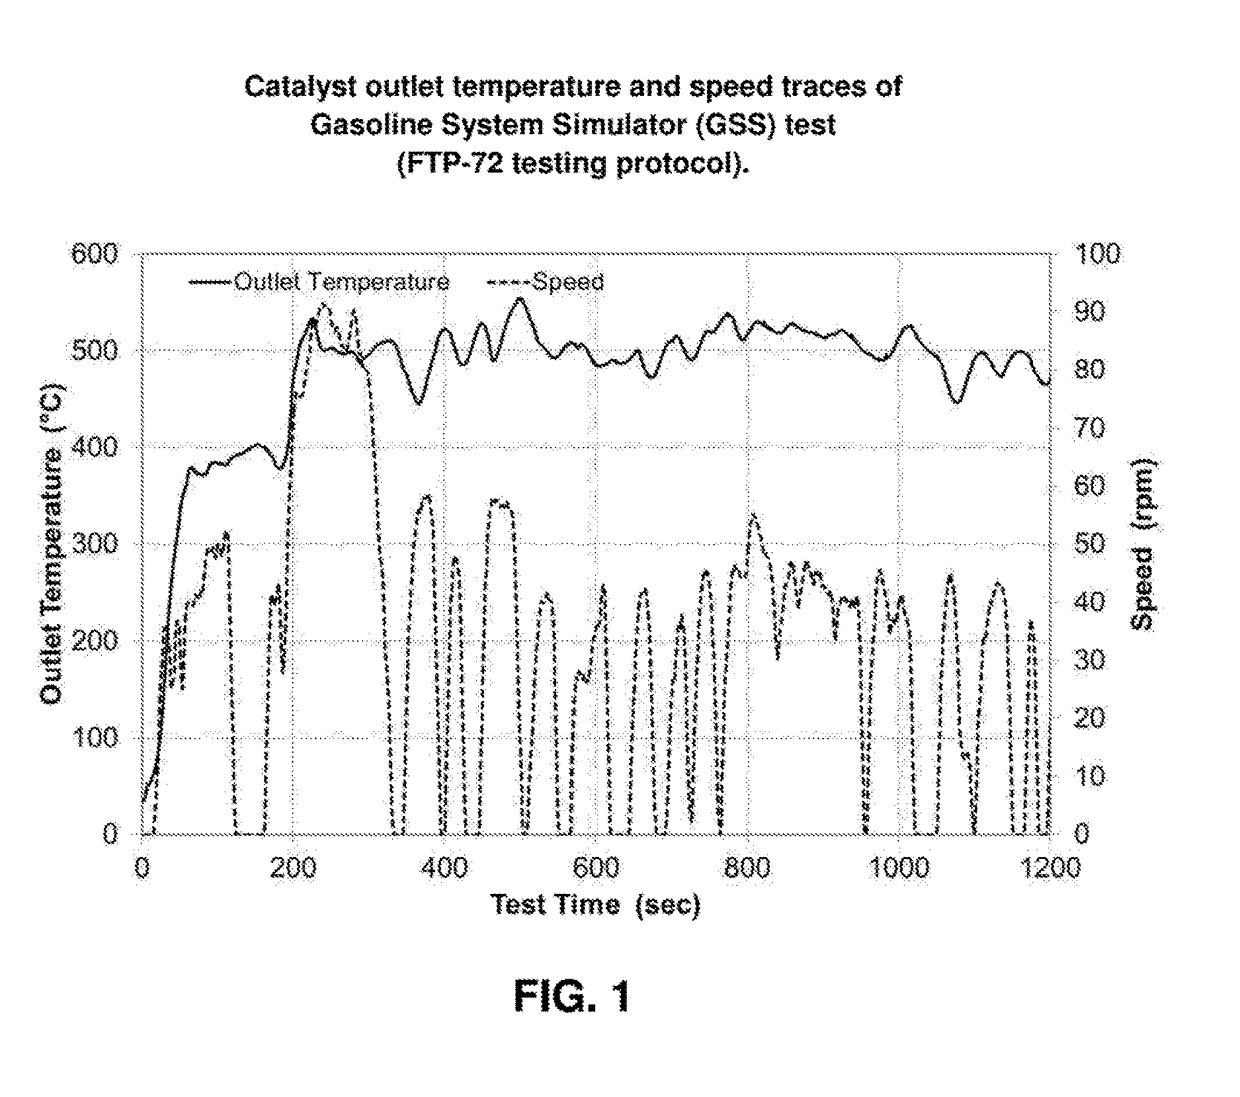 Automotive Catalysts With Palladium Supported In An Alumina-Free Layer